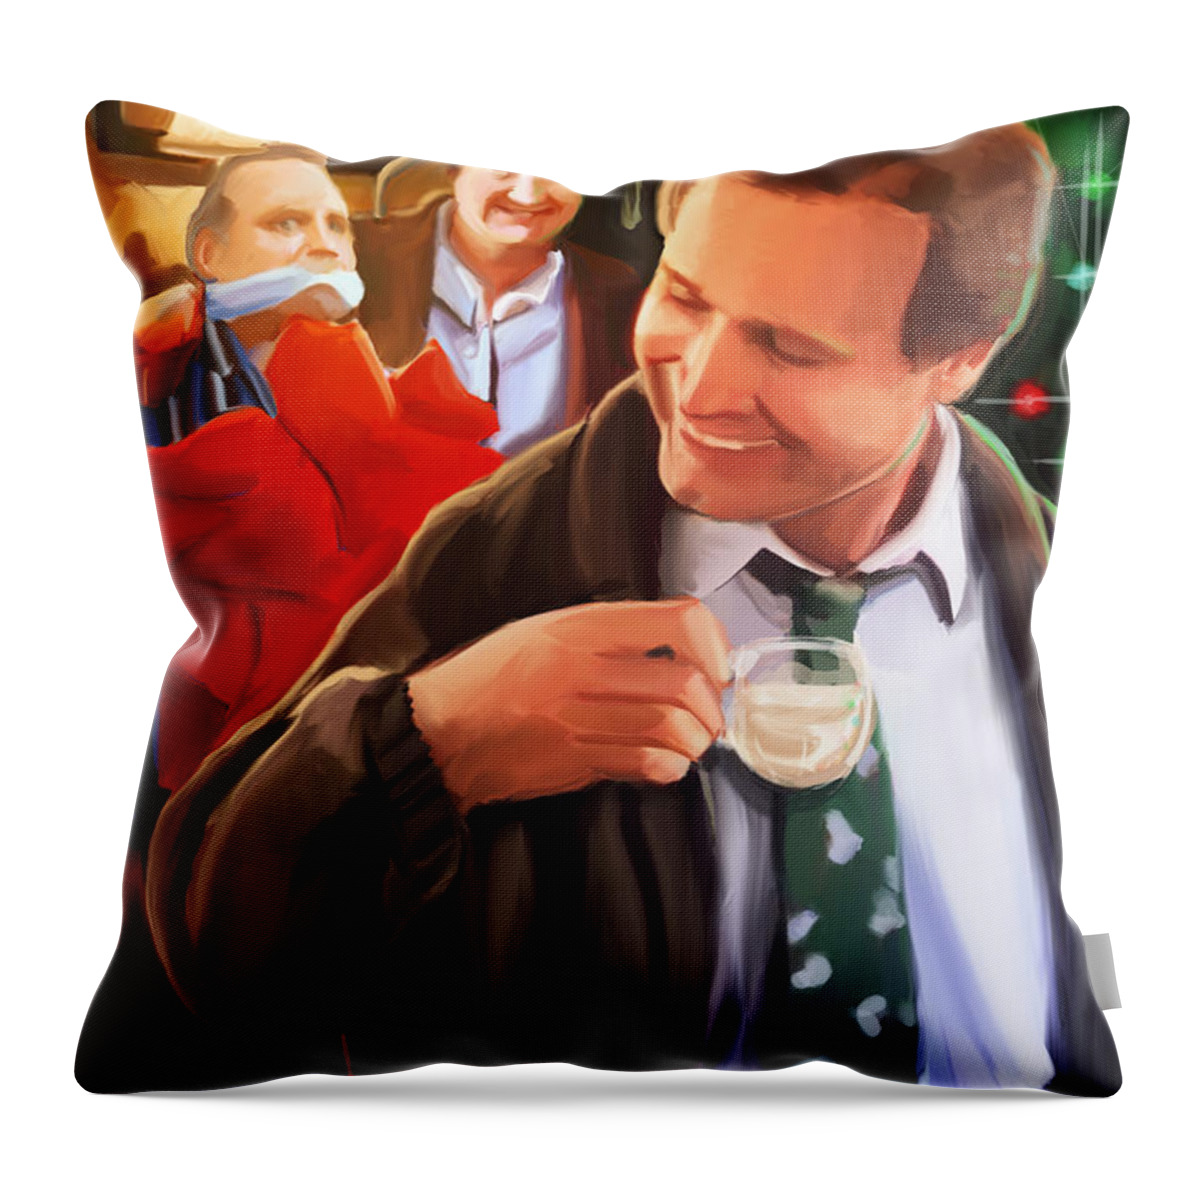 National Lampoons Throw Pillow featuring the painting Wrapped In A Bow by Brett Hardin